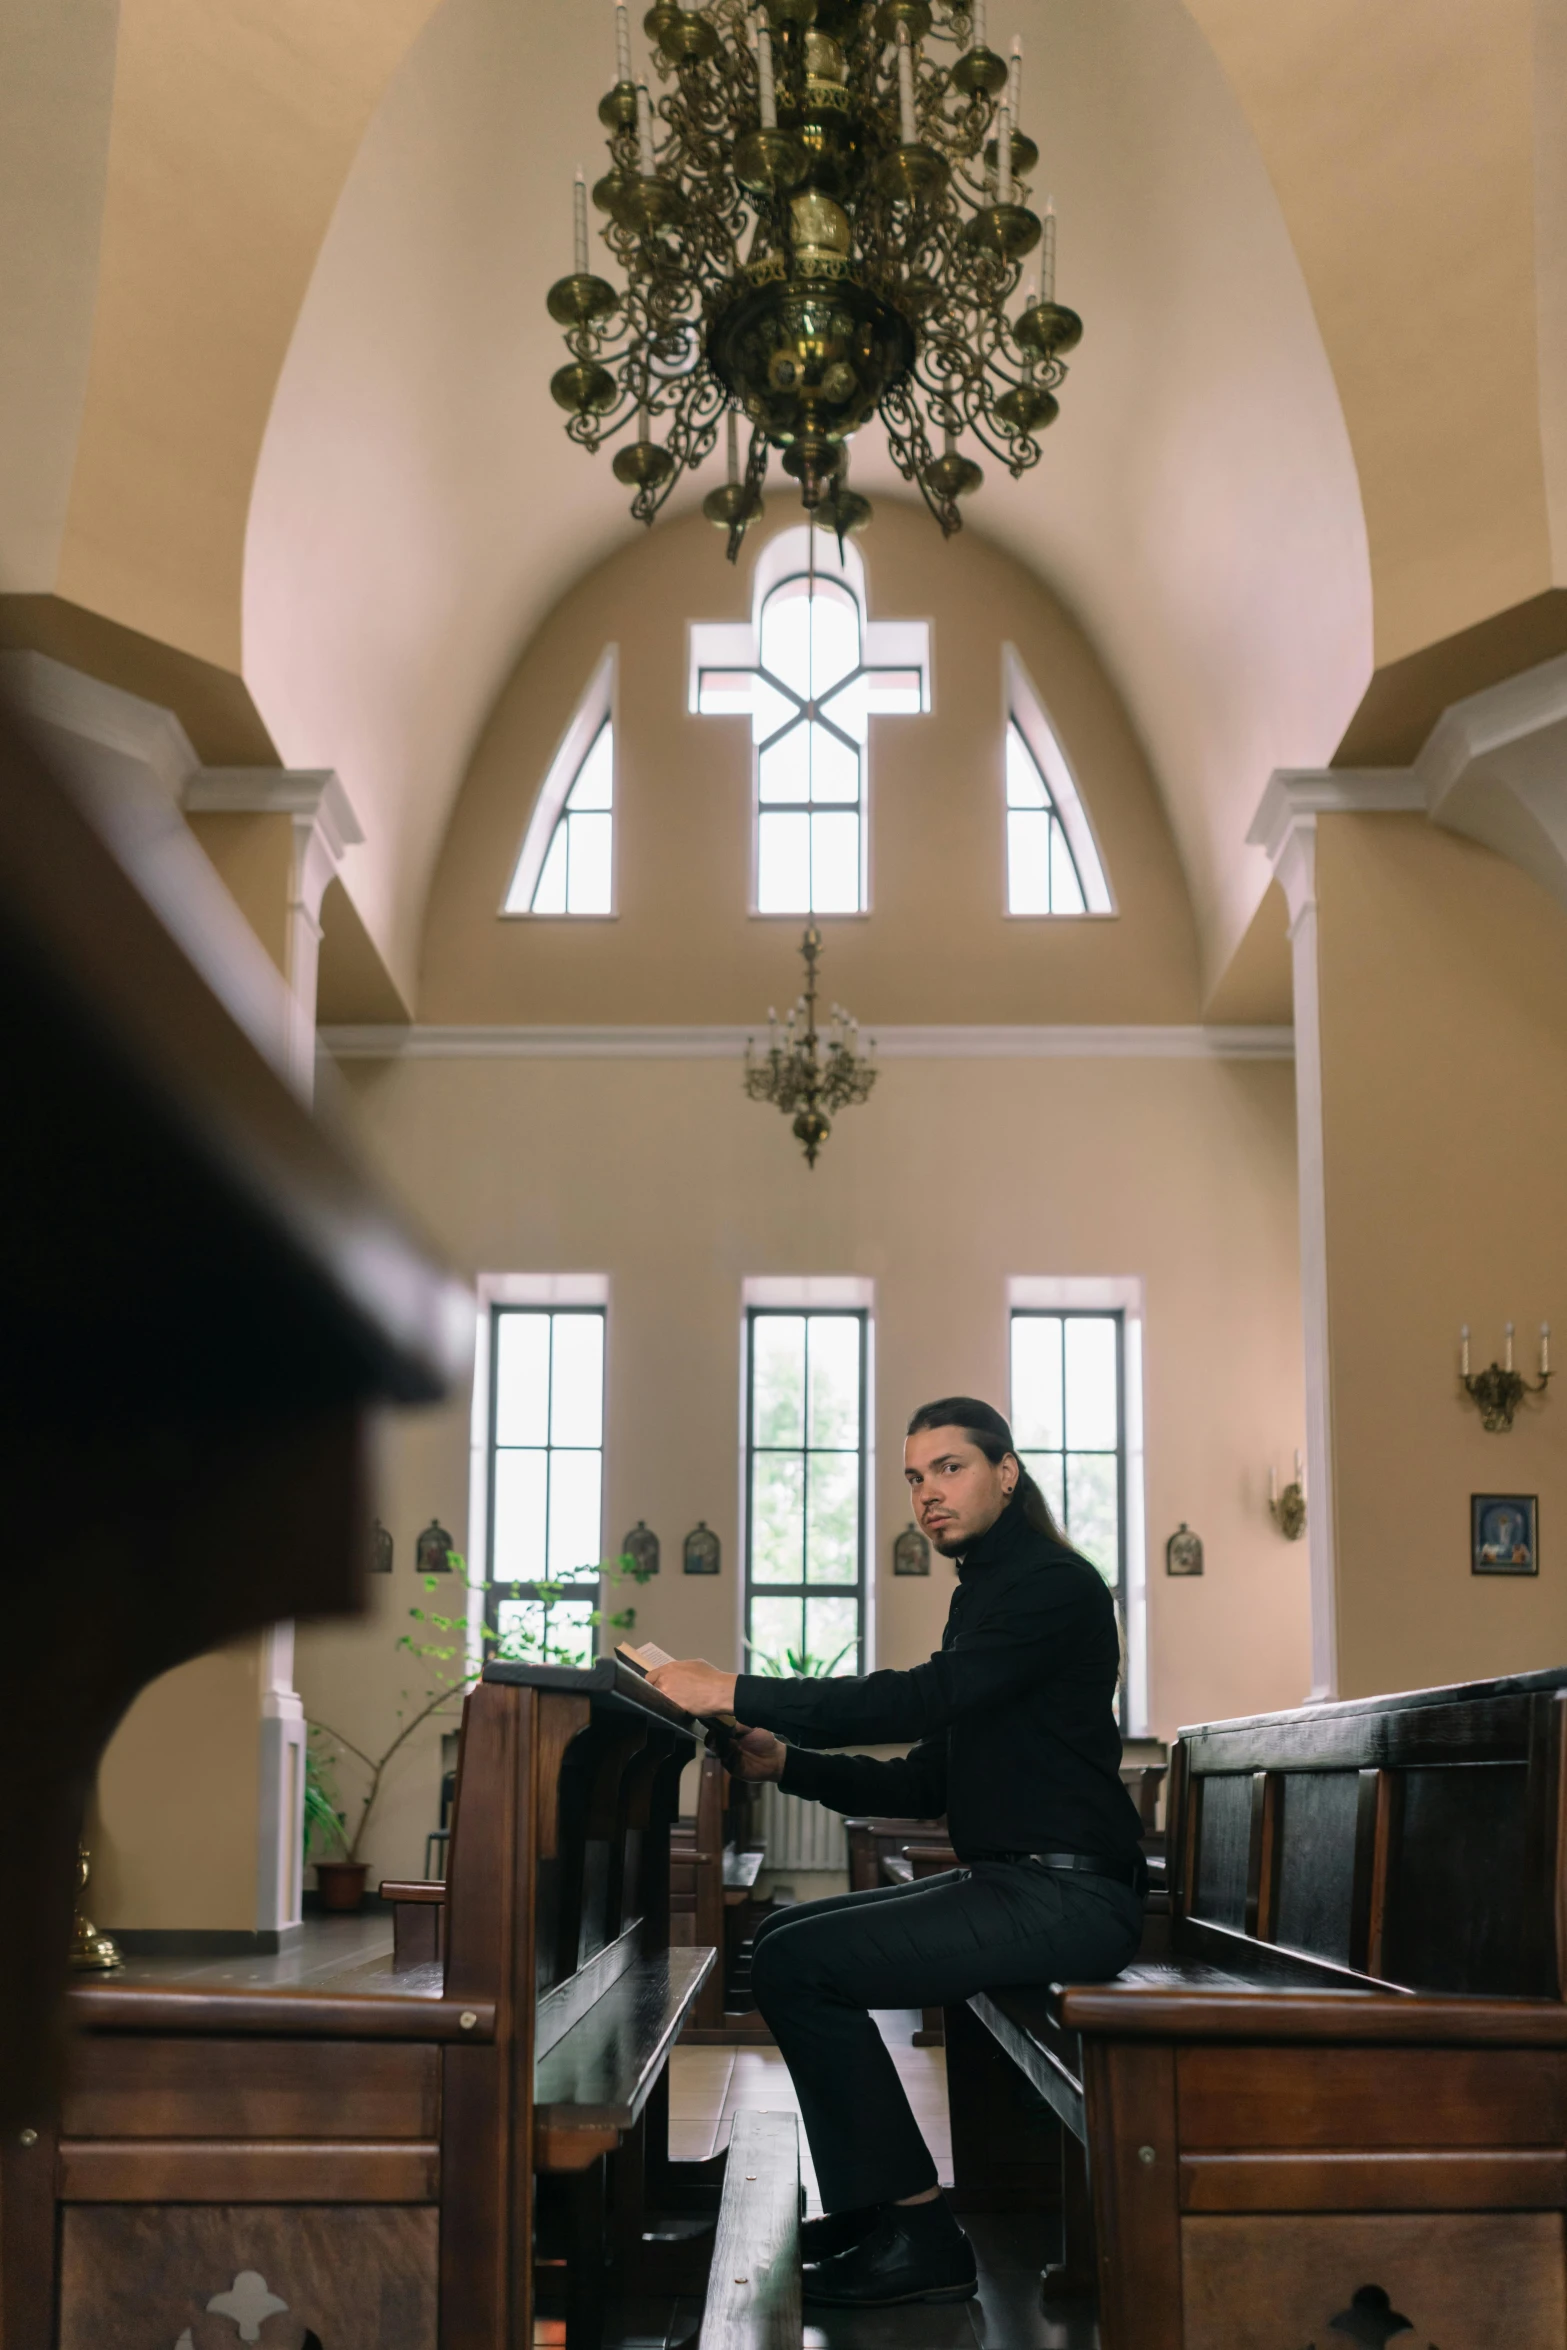 a person sitting on a piano in a church